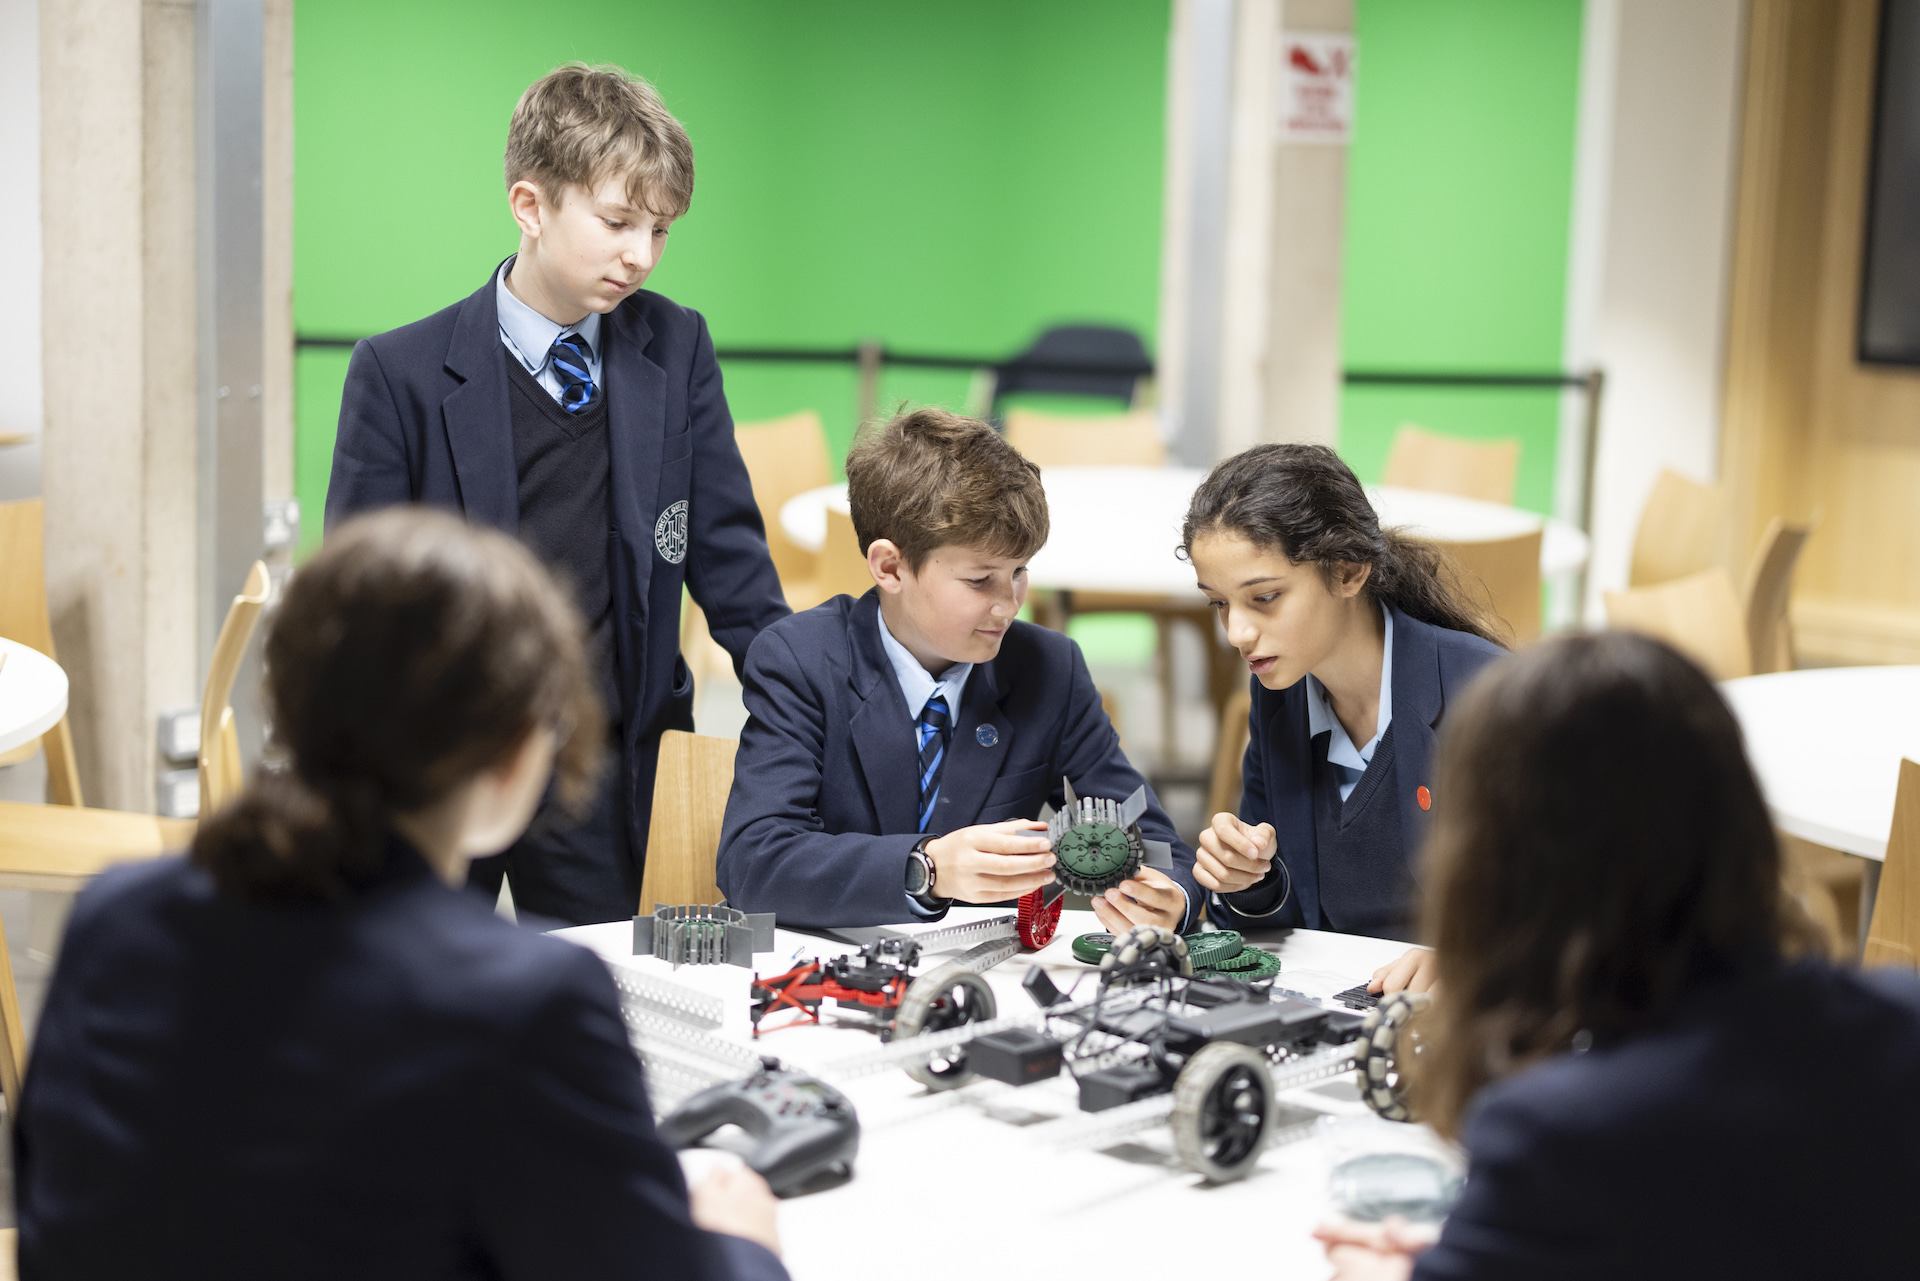 Senior pupils in the Innovation Hub at Ibstock Place School, a private school near Richmond, Barnes, Putney, Kingston, and Wandsworth